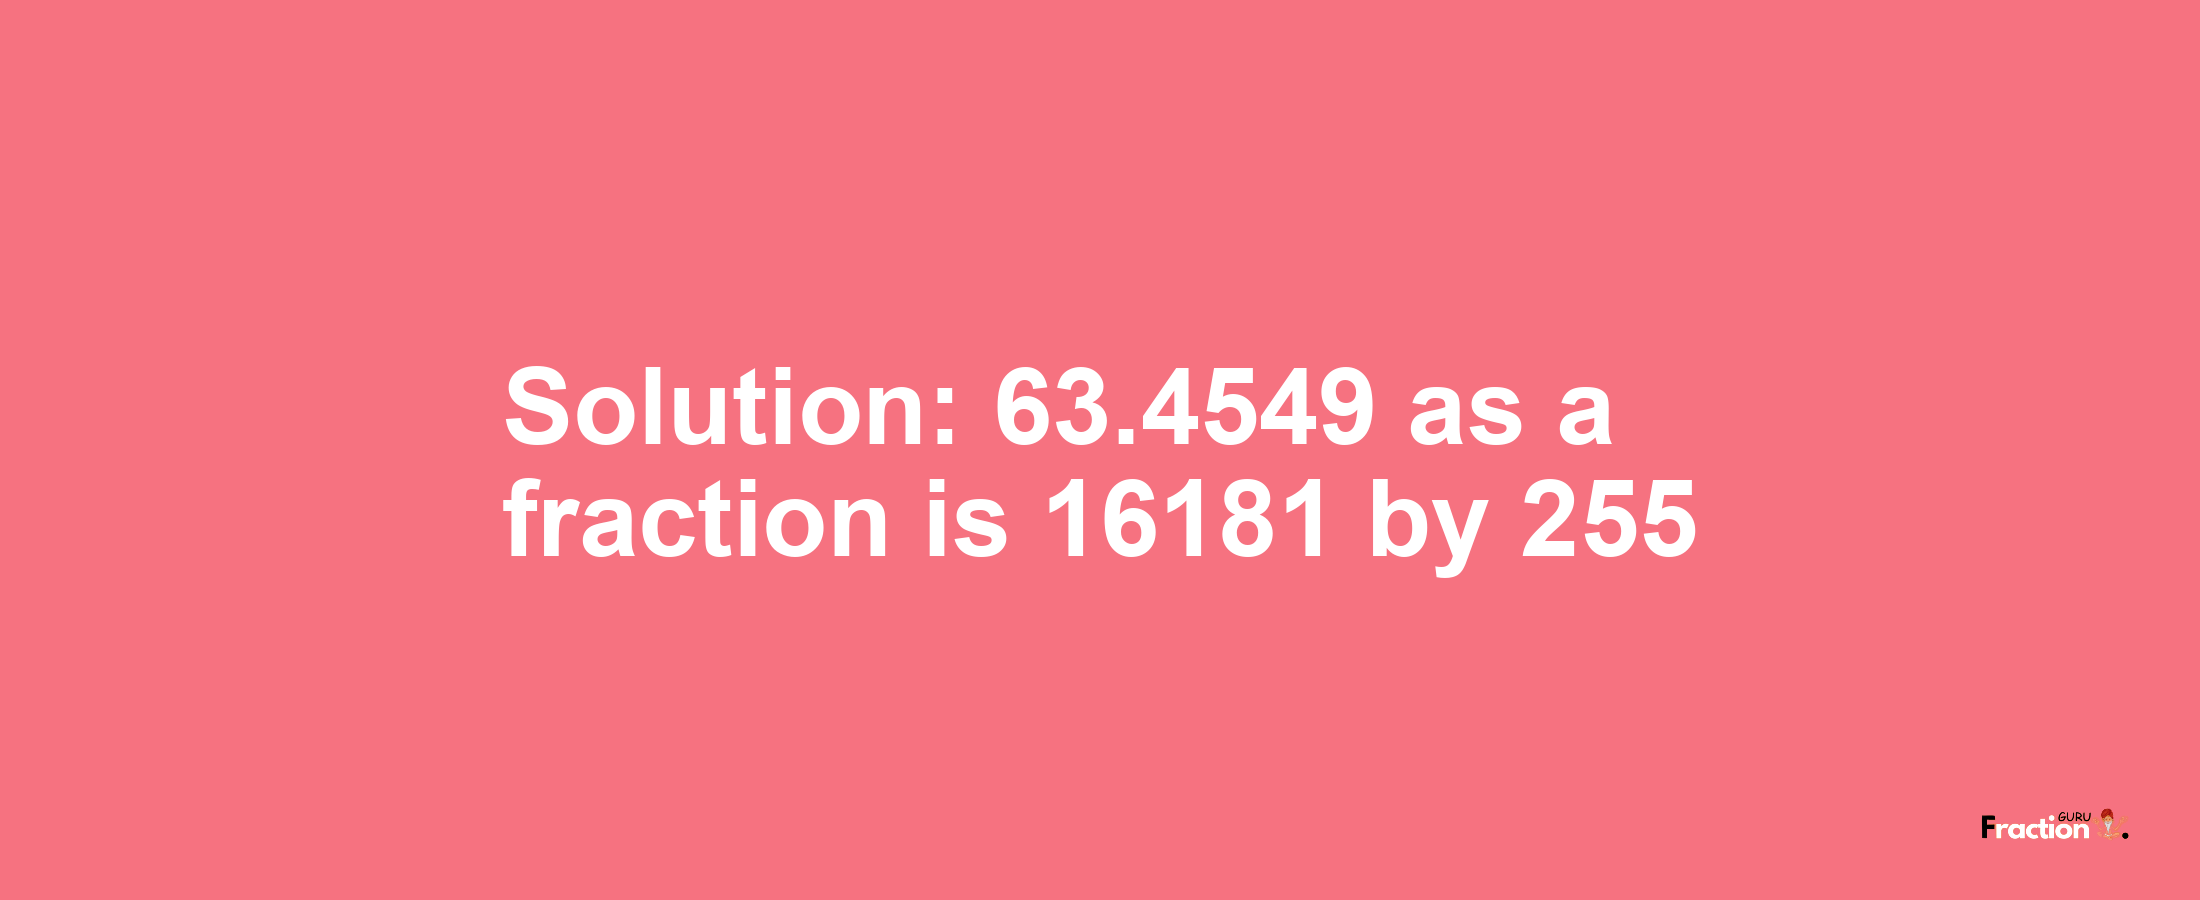 Solution:63.4549 as a fraction is 16181/255